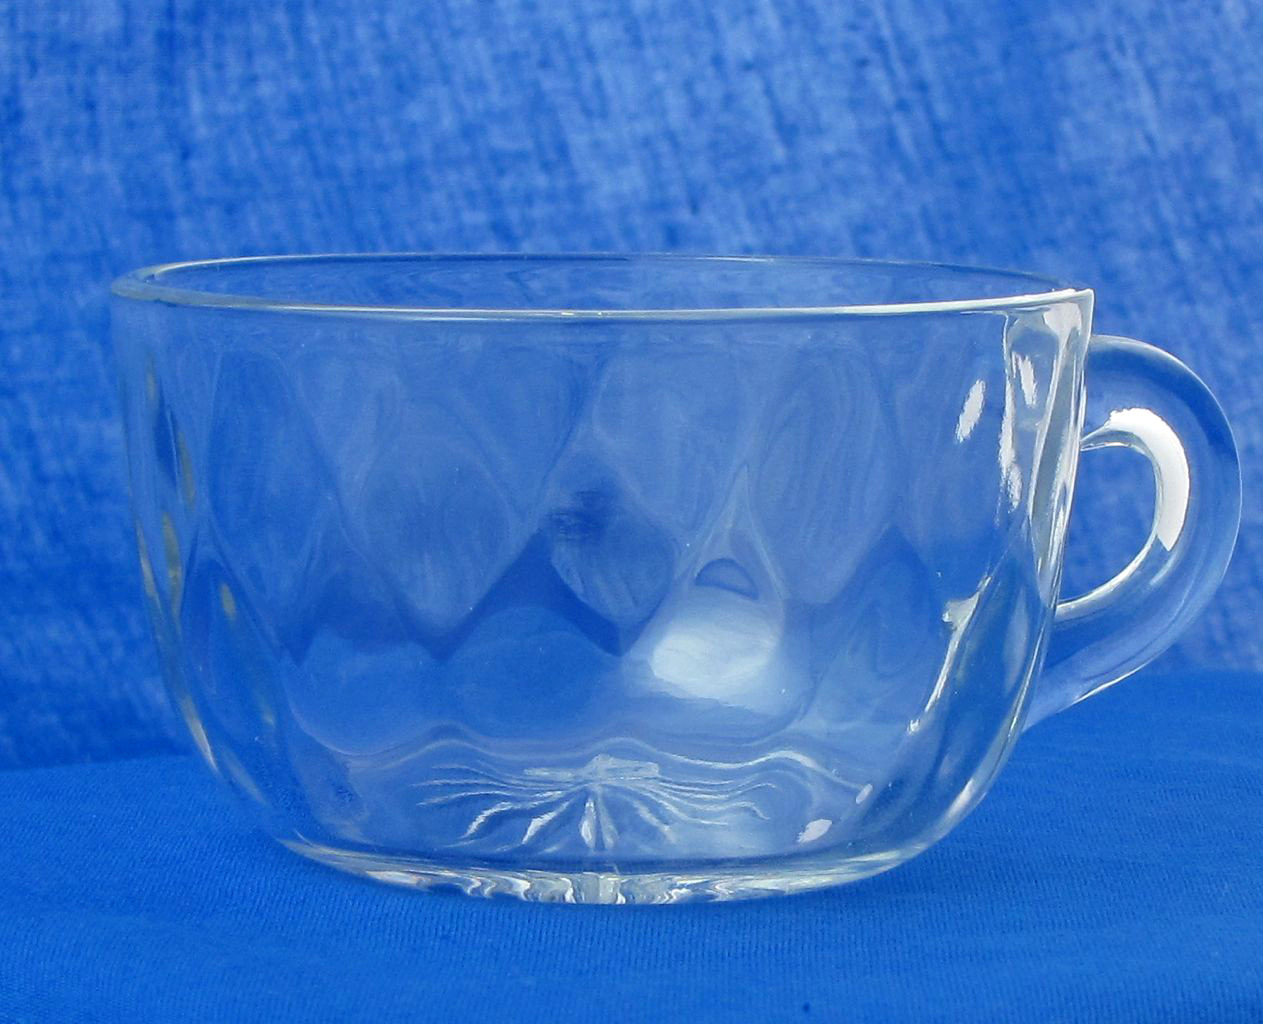 Heisey #1184 Yeoman, Punch Cup, crystal, 1913-1957